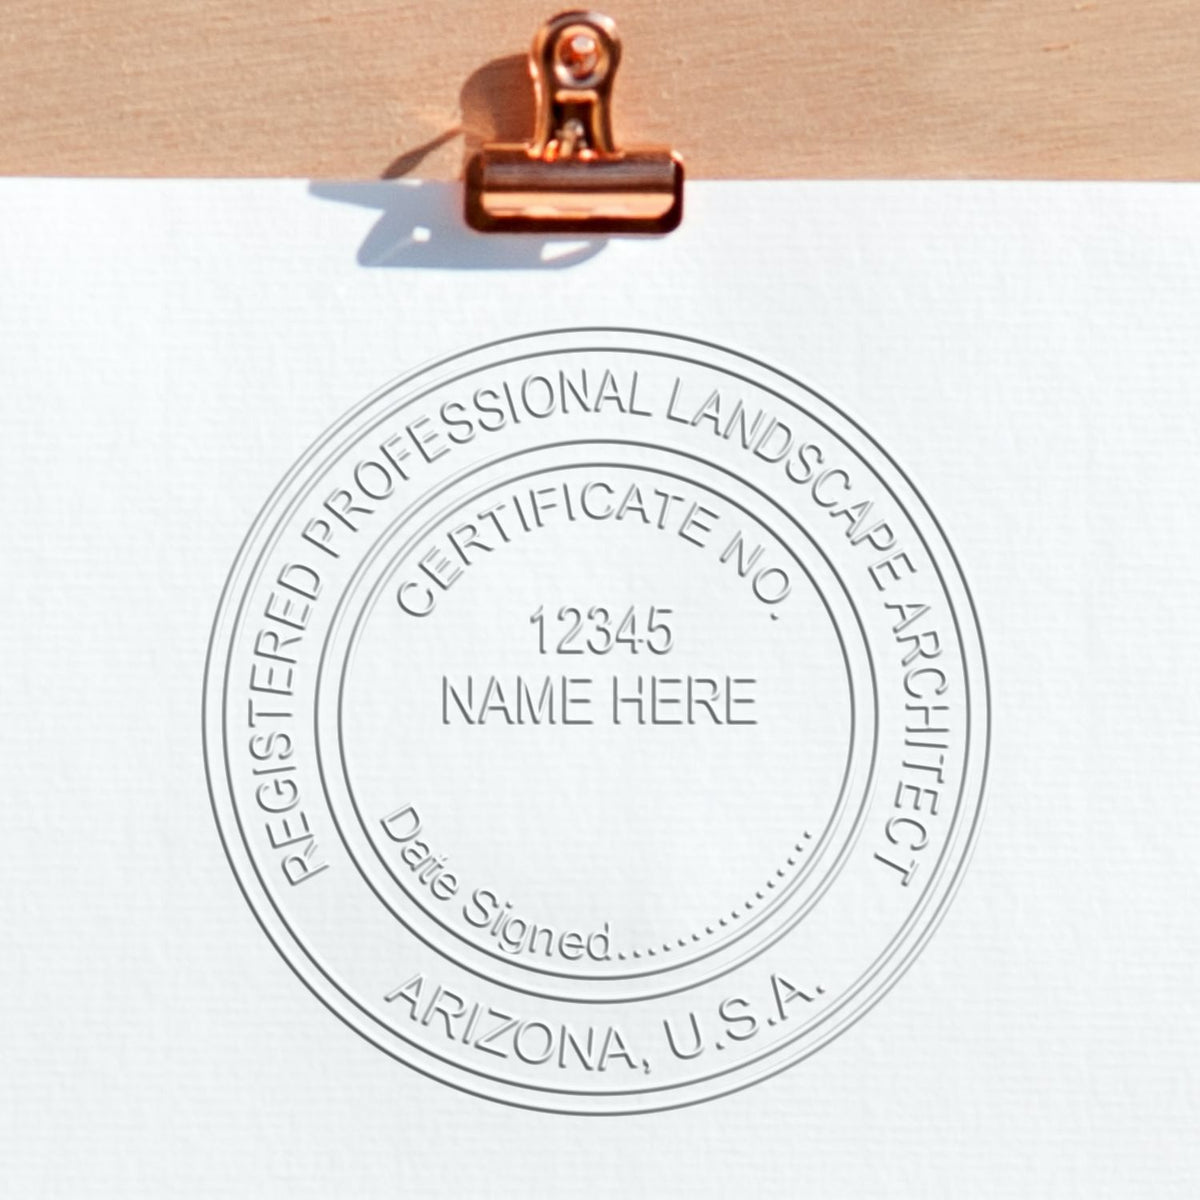 A stamped imprint of the Gift Arizona Landscape Architect Seal in this stylish lifestyle photo, setting the tone for a unique and personalized product.